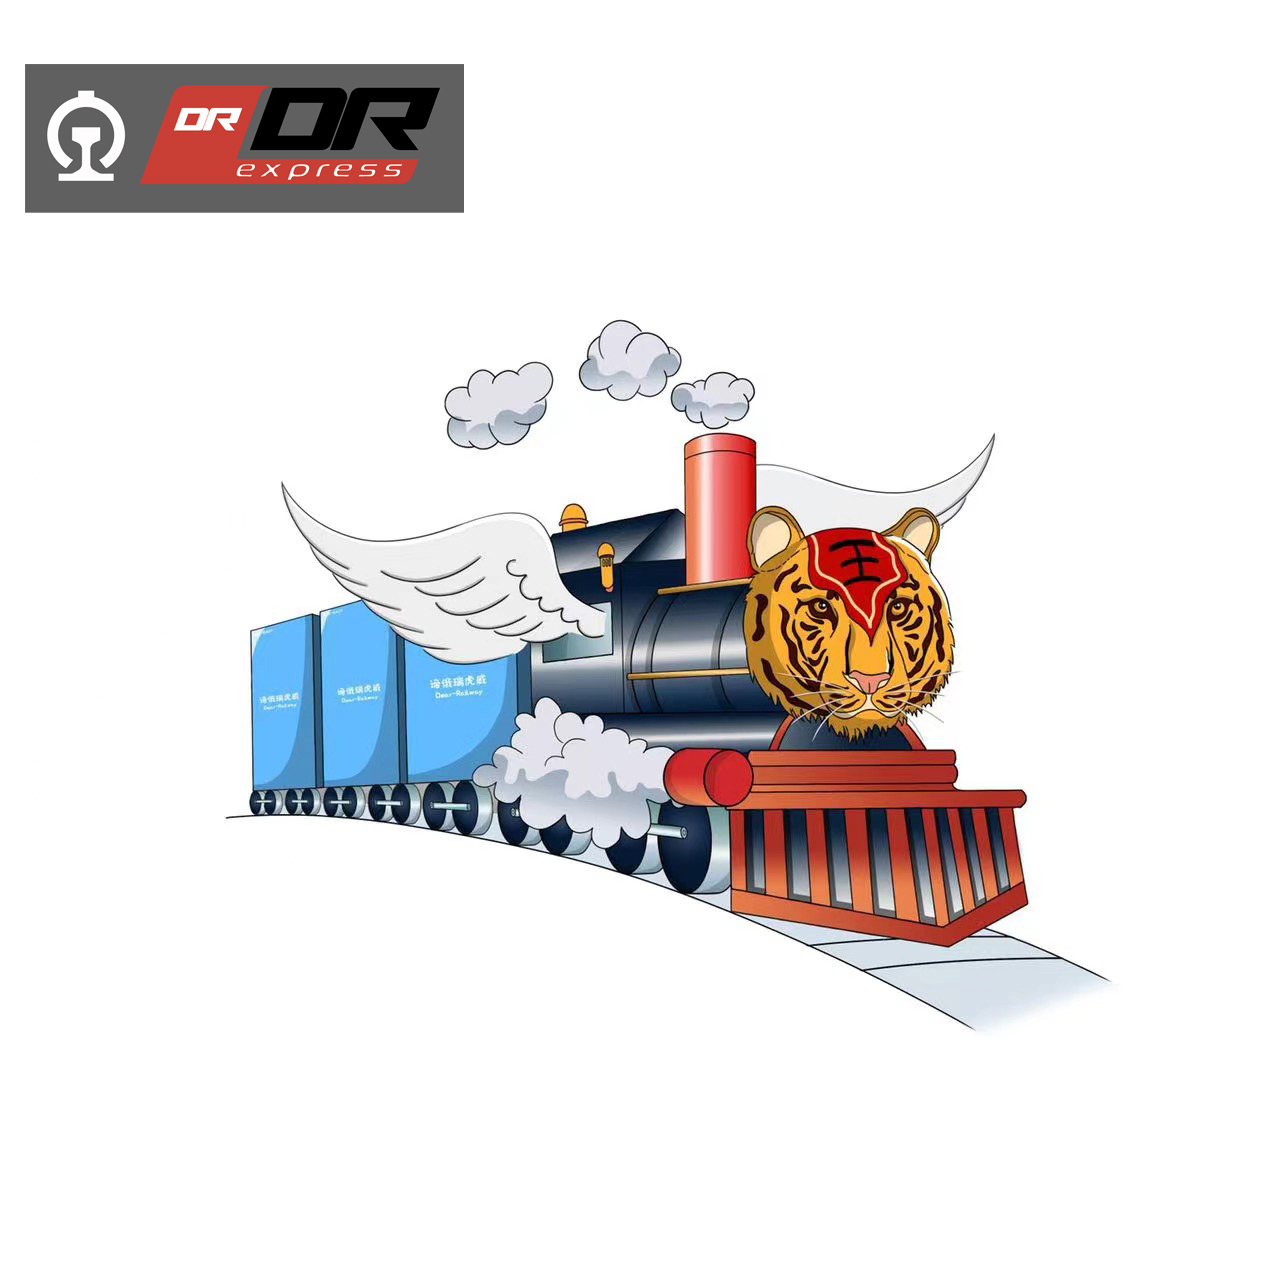 Rail transport tires from China to Russia.